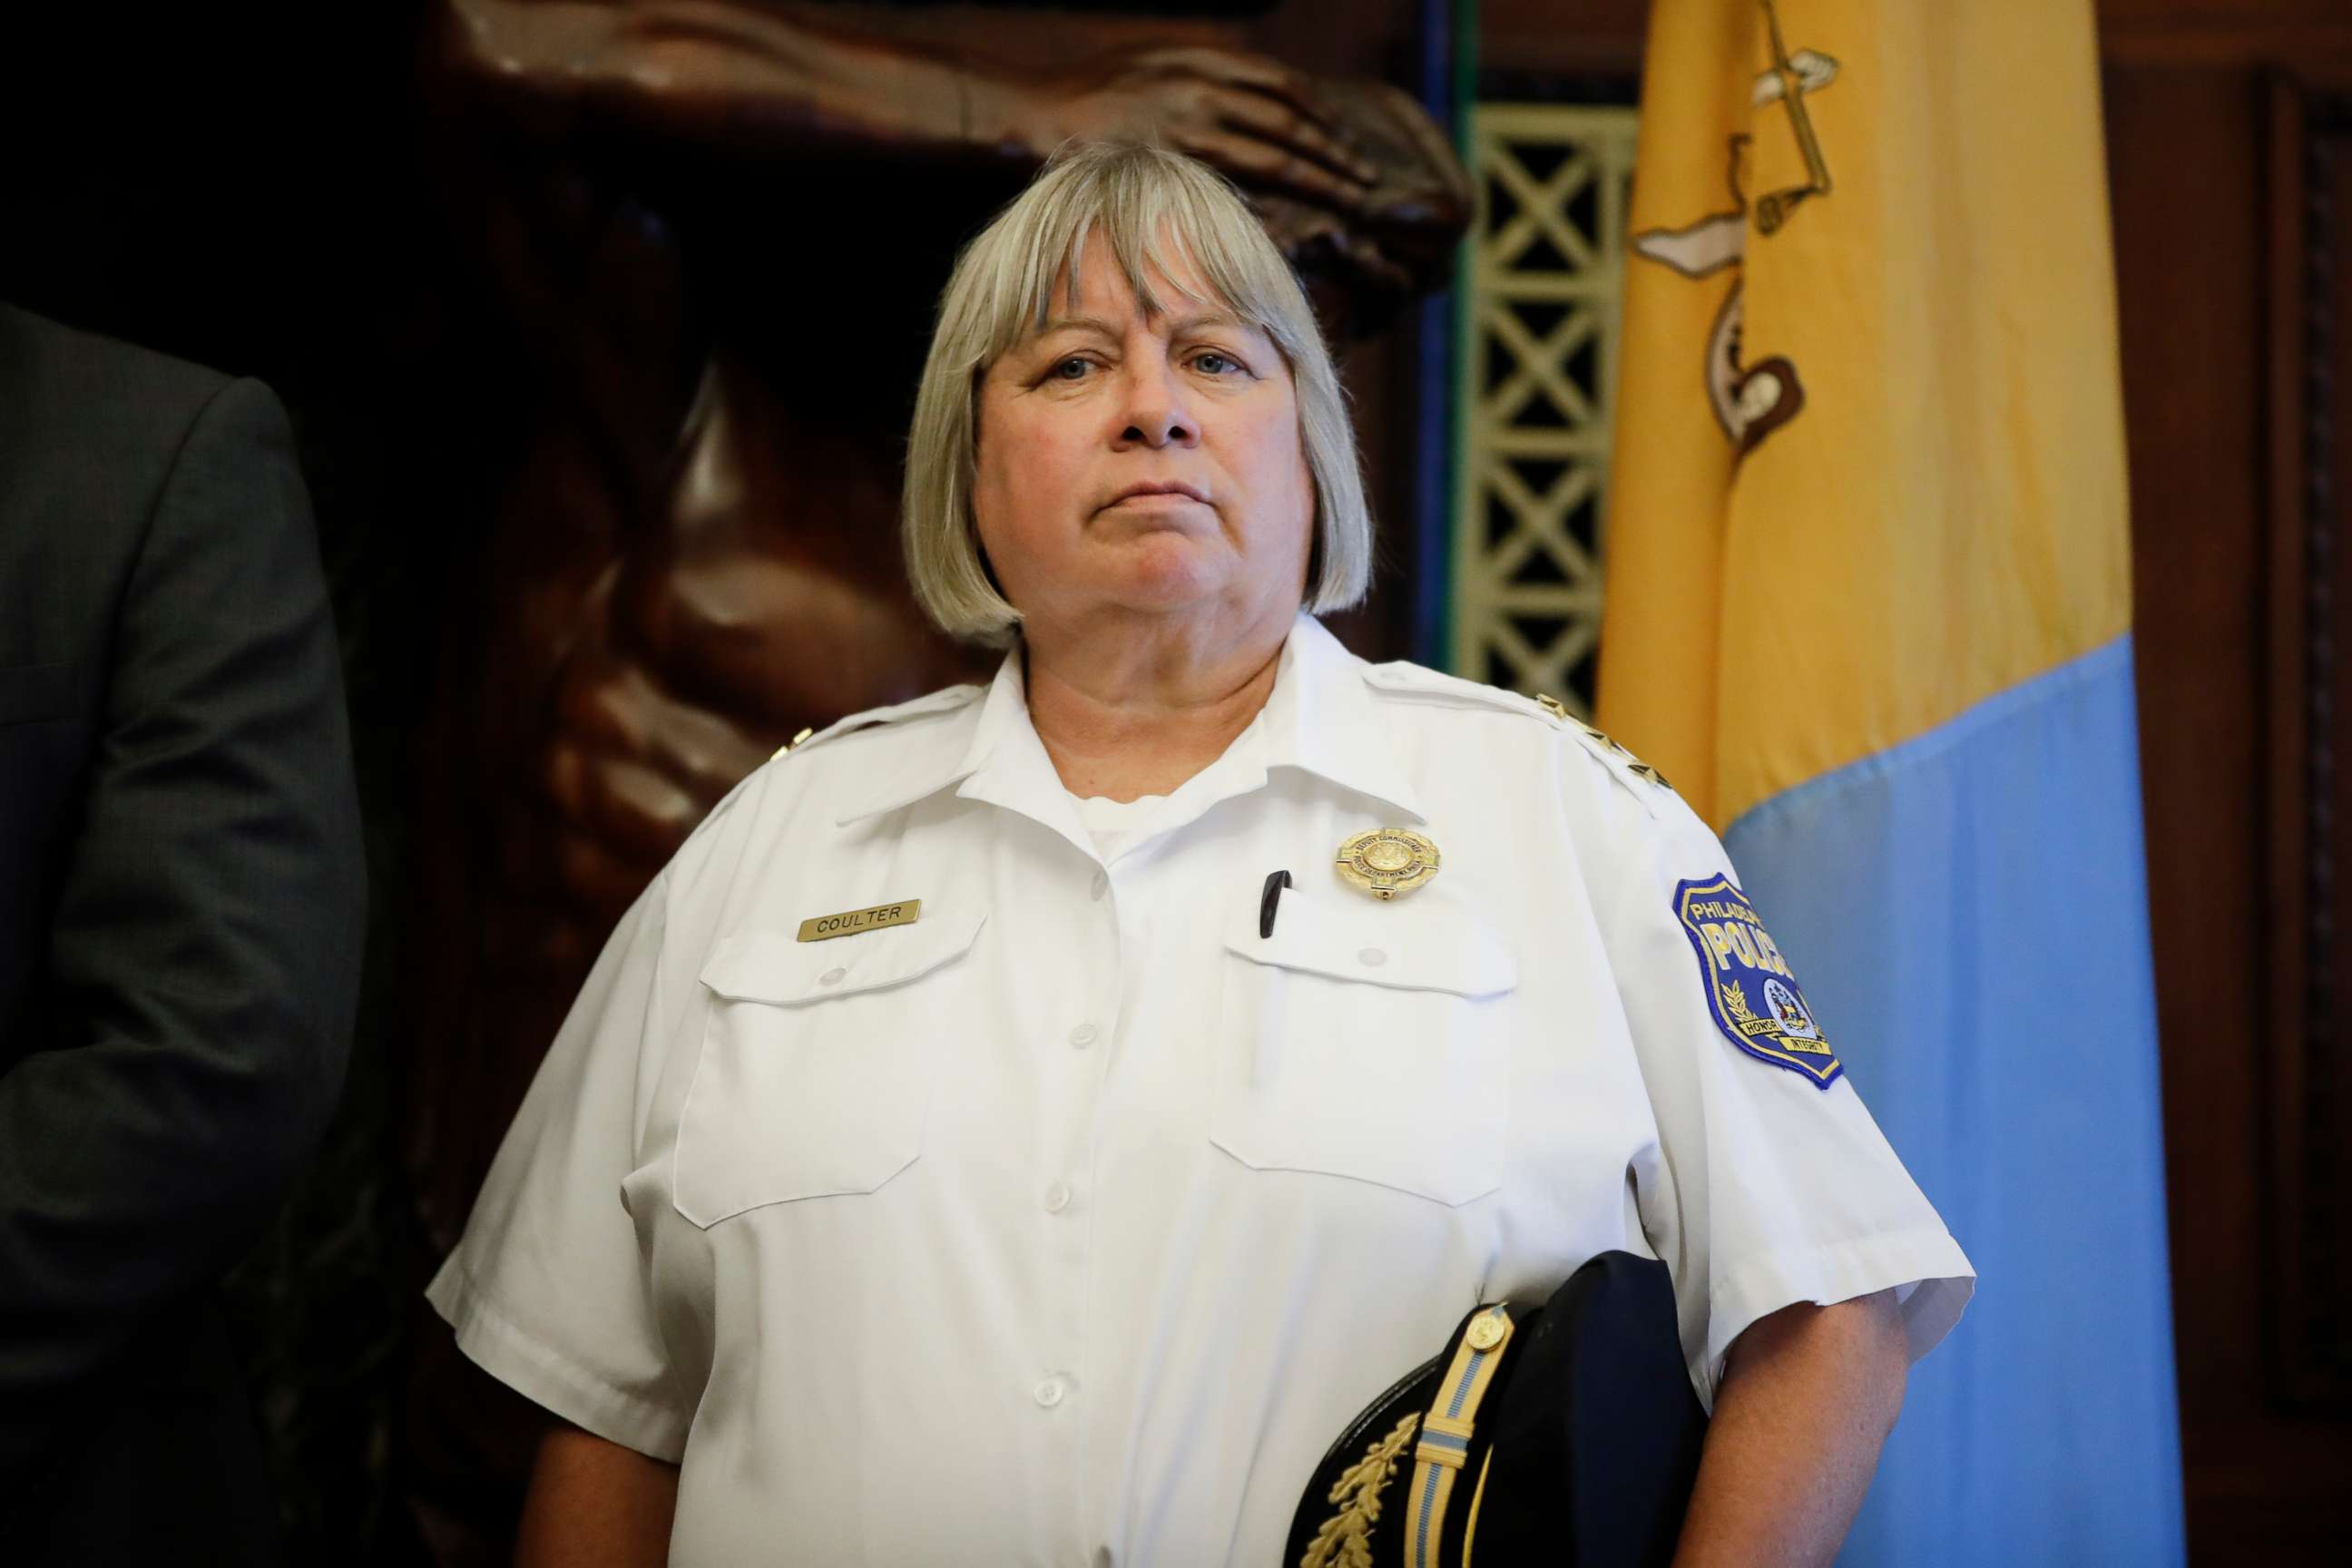 PHOTO: Philadelphia's acting Police Commissioner Christine Coulter listens as Mayor Jim Kenney speaks with members of the media during a news conference at City Hall in Philadelphia, Aug. 21, 2019.